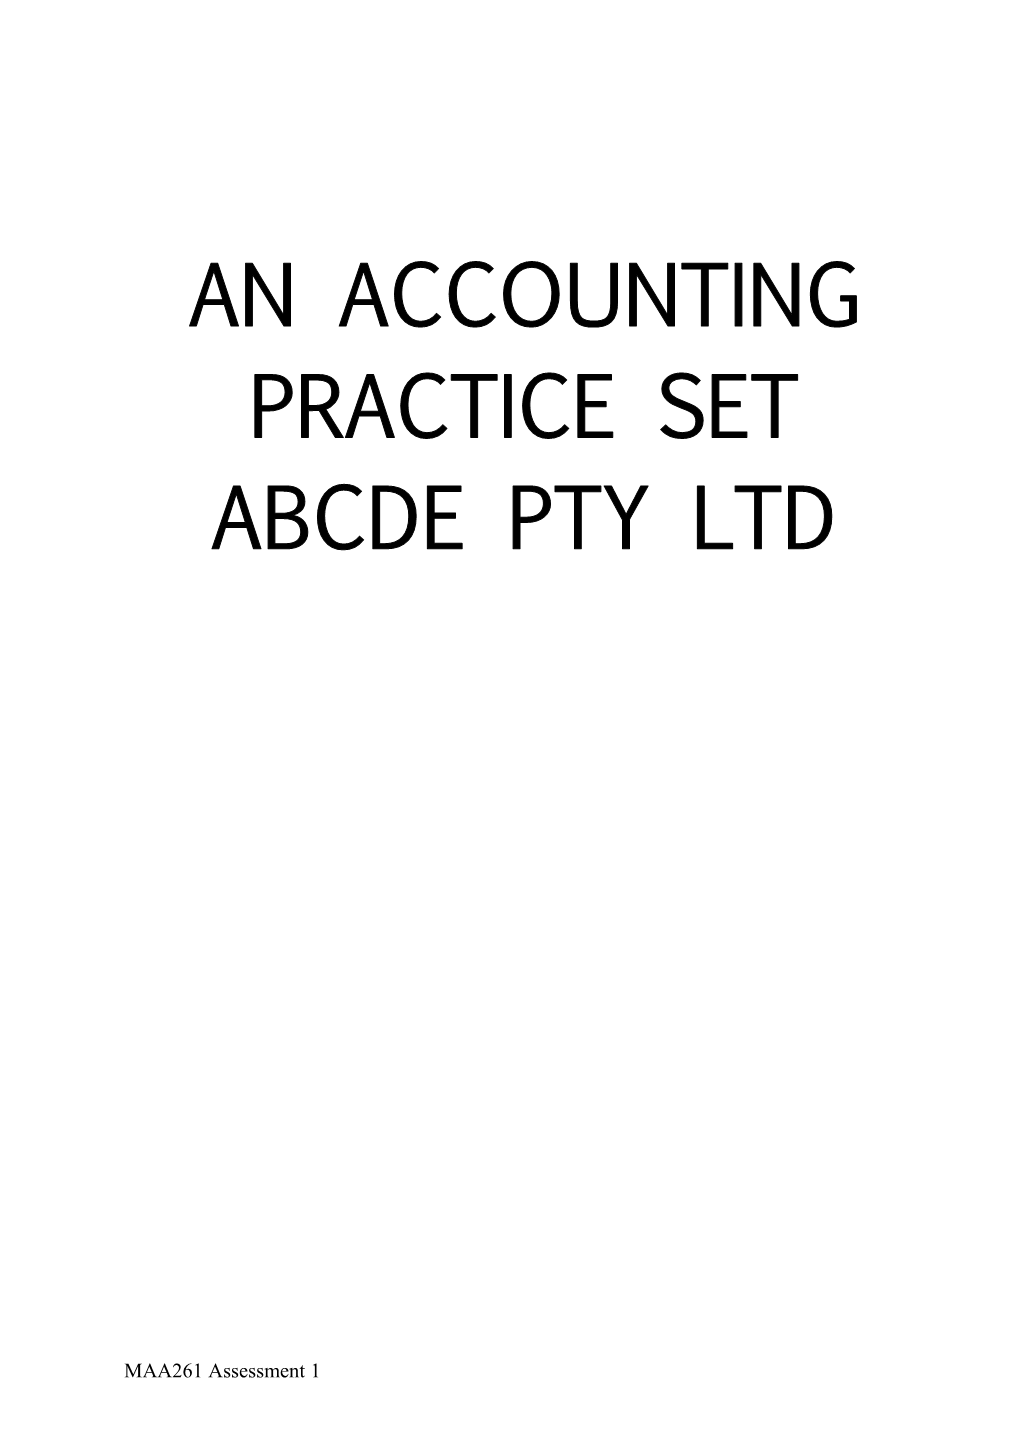 An Accounting Practice Set